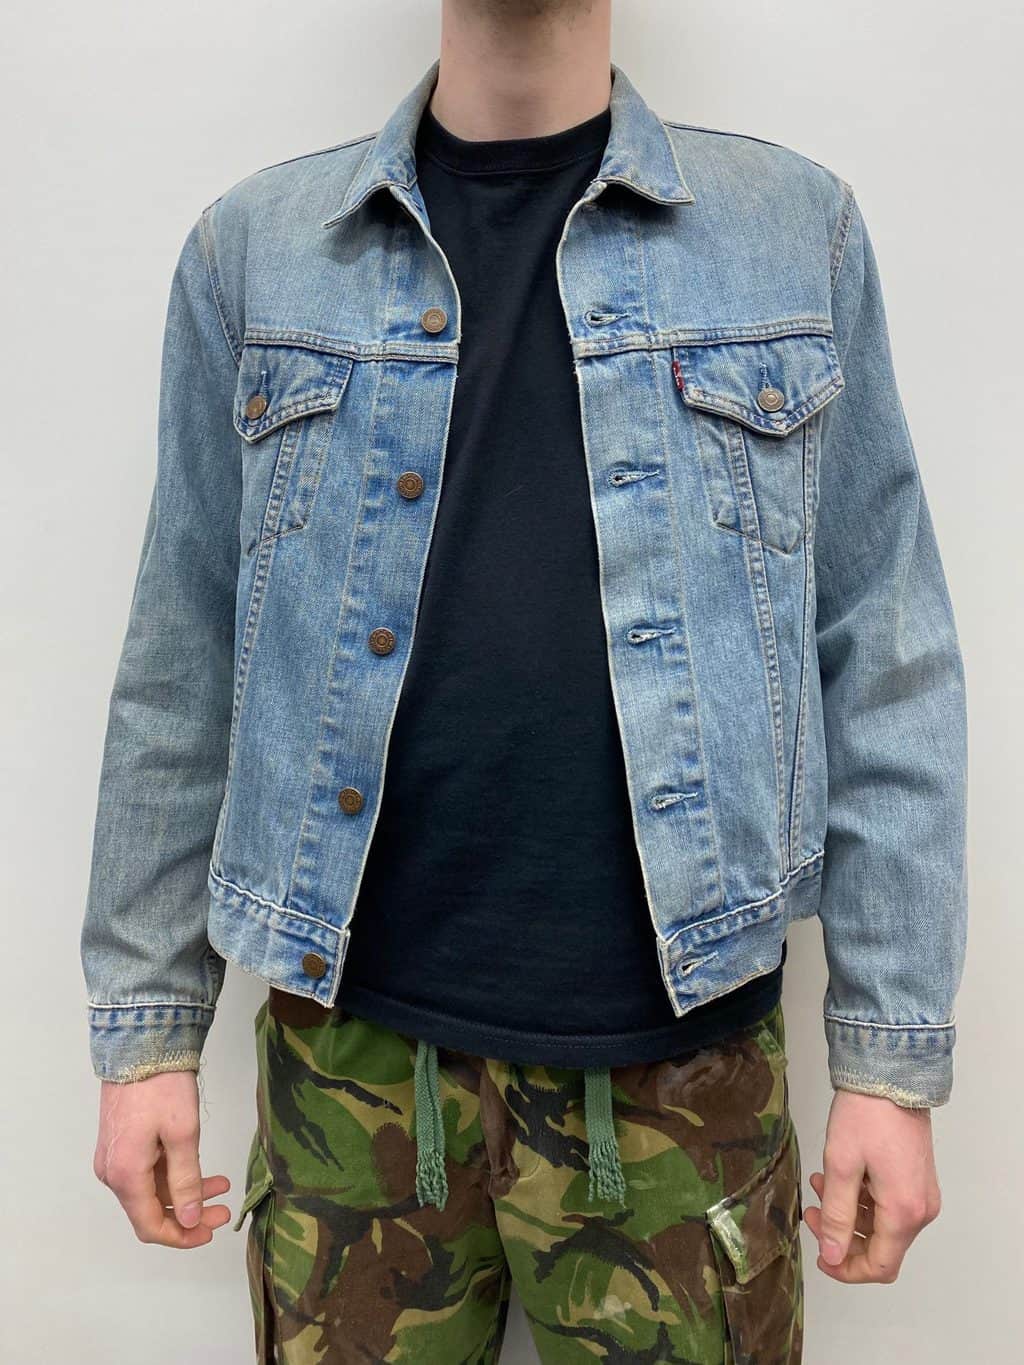 Mens Vintage Y2K Levis Trucker Jacket in Light Bue Wash with Distressed  Patches - S / M - St Cyr Vintage